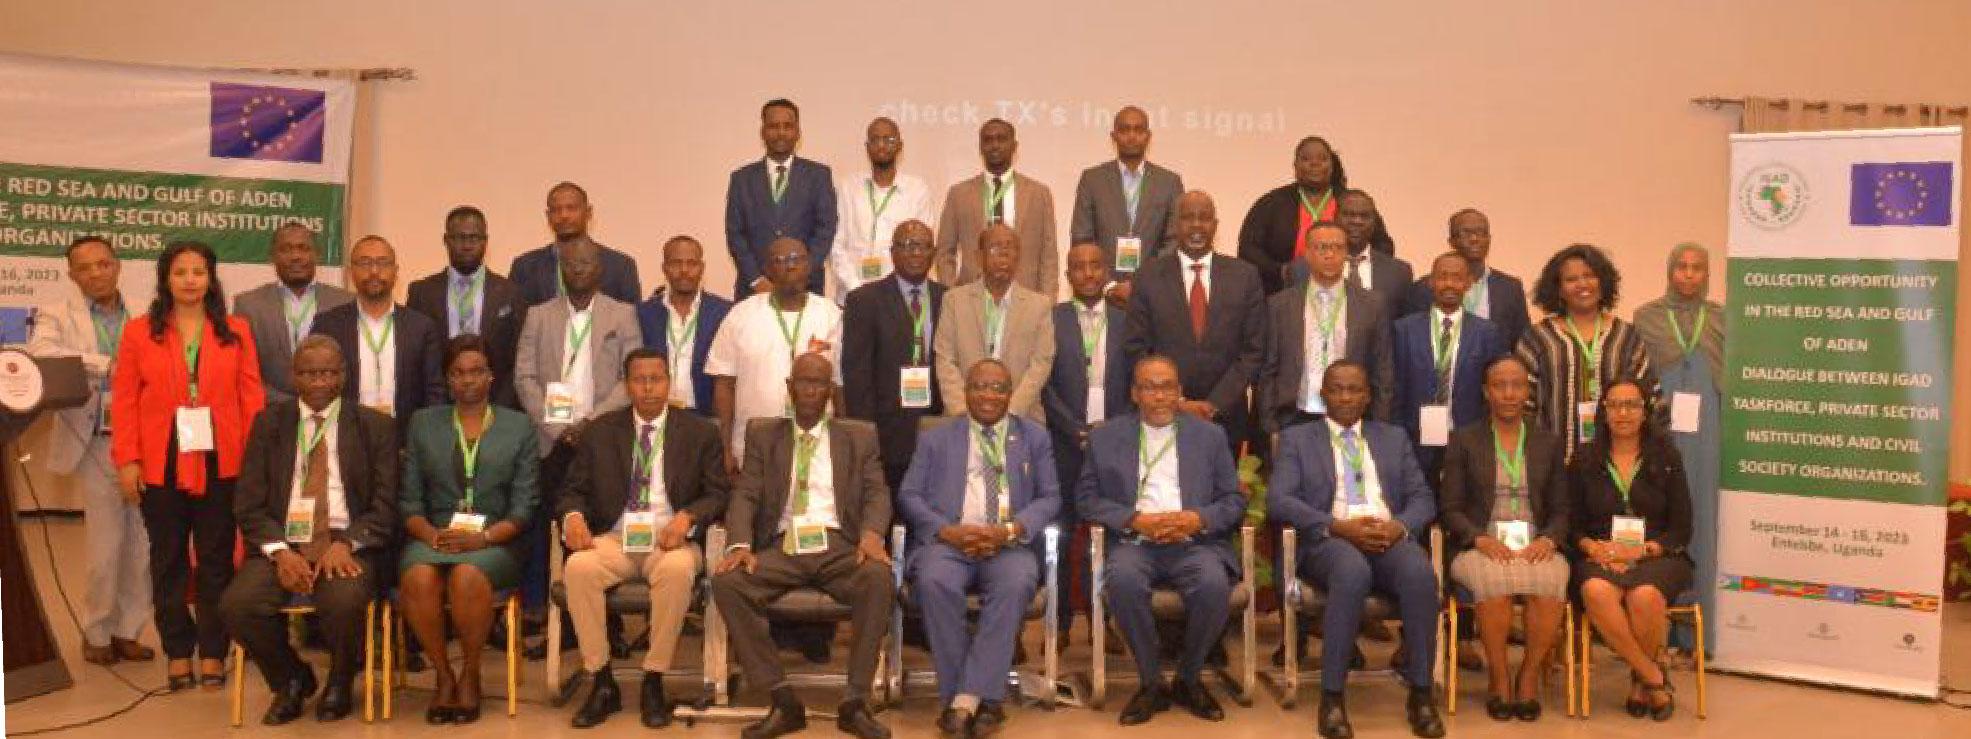 Three-Day Dialogue on Collective Opportunities in the Red Sea and Gulf of Aden between the IGAD Taskforce on the Red Sea and Gulf of Aden, Private Sector Institutions, and Civil Society Organisations concludes with actionable recommendations